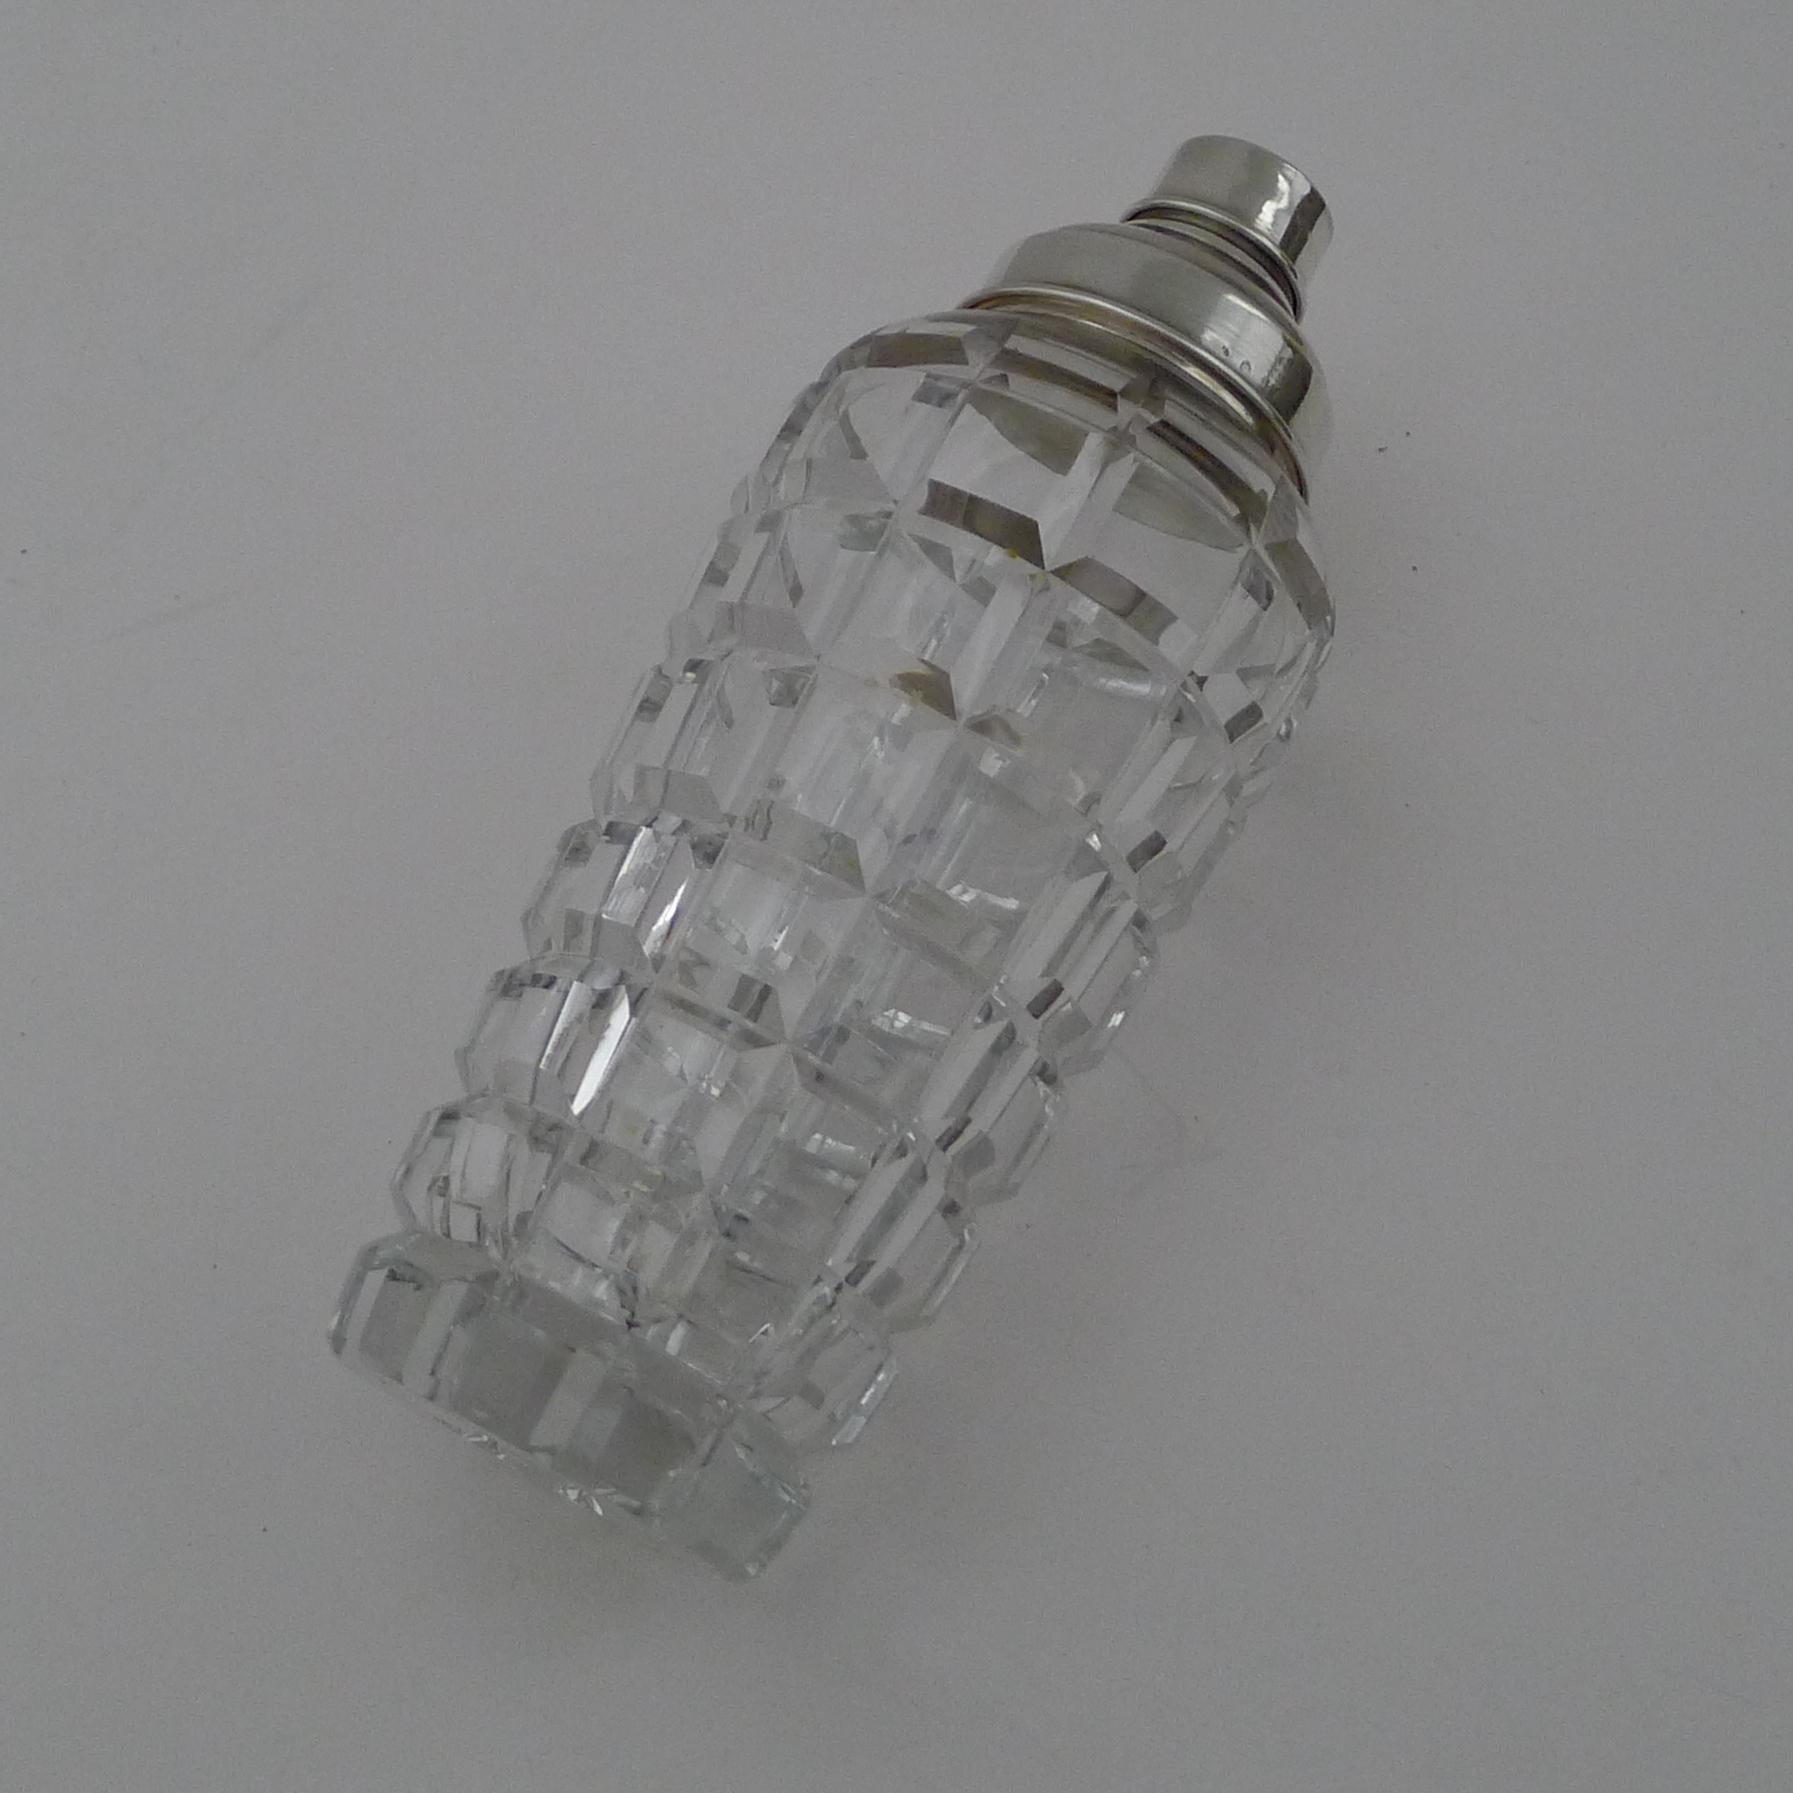 Continental Sterling Silver Topped Cut Crystal Shaker For Sale 1